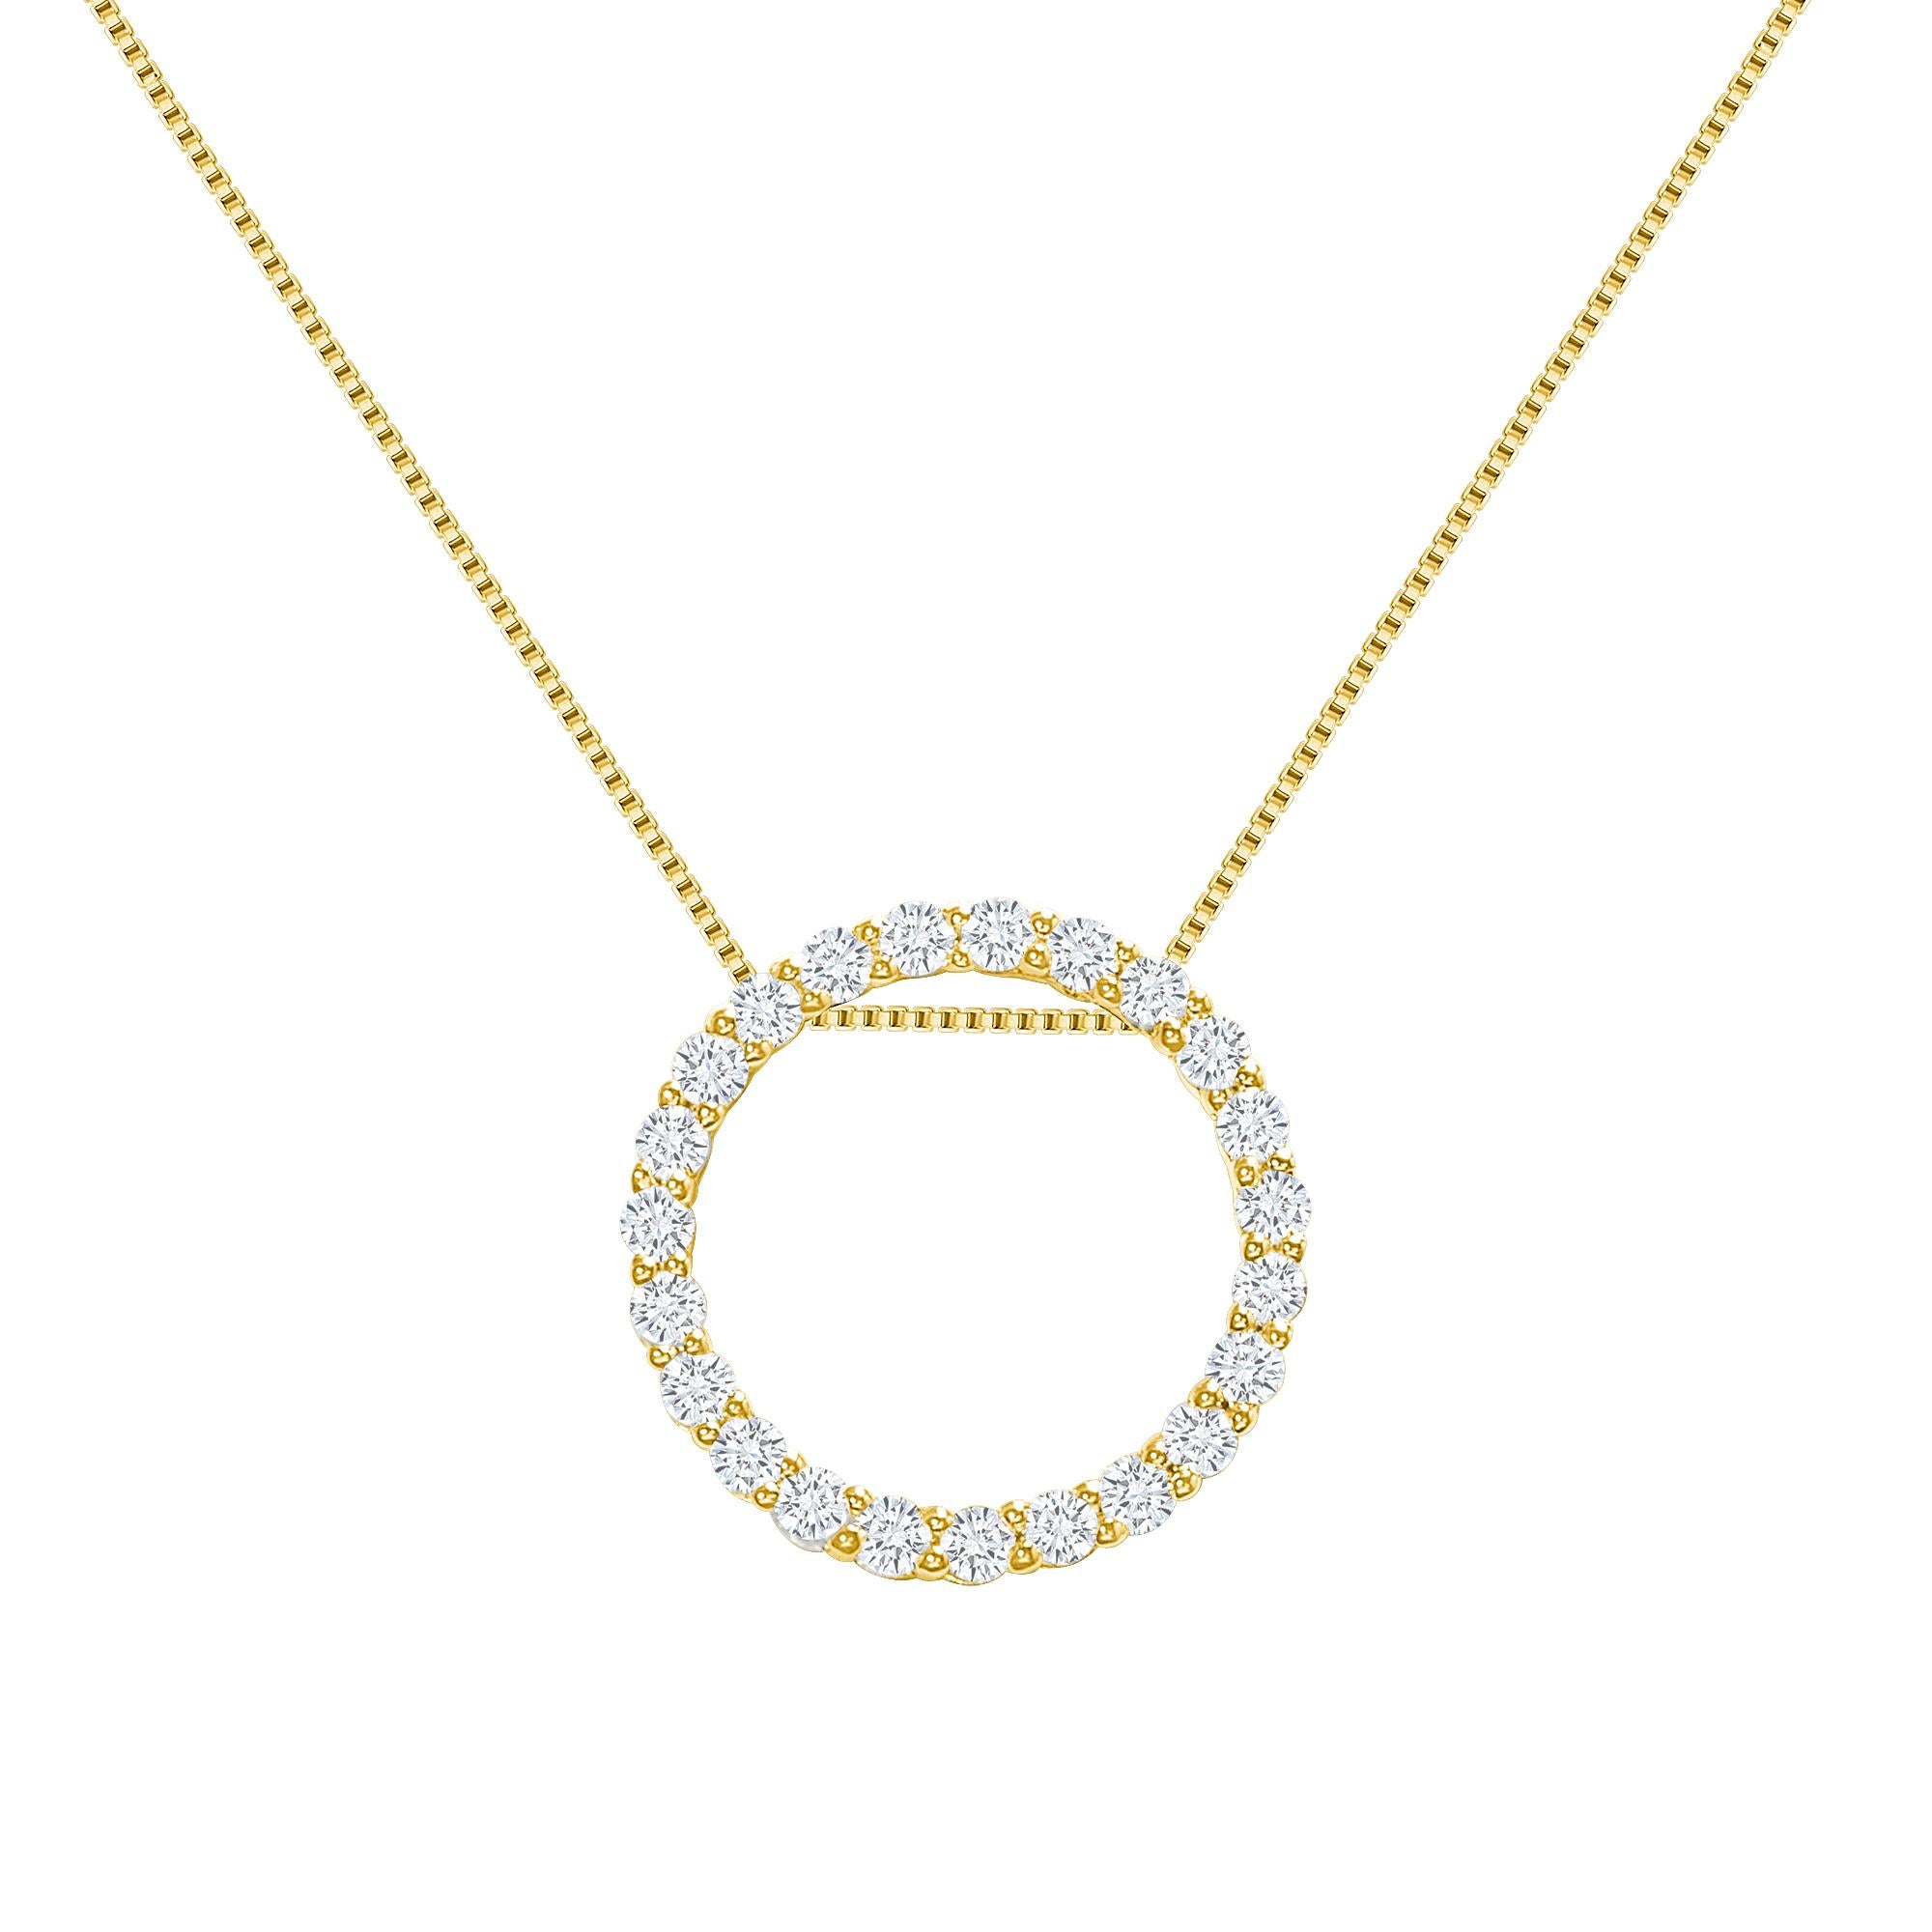 This diamond circle pendant provides a glowing chic look.
Metal: 14k Gold
Diamond Total Carats: 3 carat
Diamond Cut: Round Natural Diamonds (Not Lab Grown)
Diamond Clarity: VS
Diamond Color: F-G
Color: Yellow Gold
Necklace Length: 20 inches